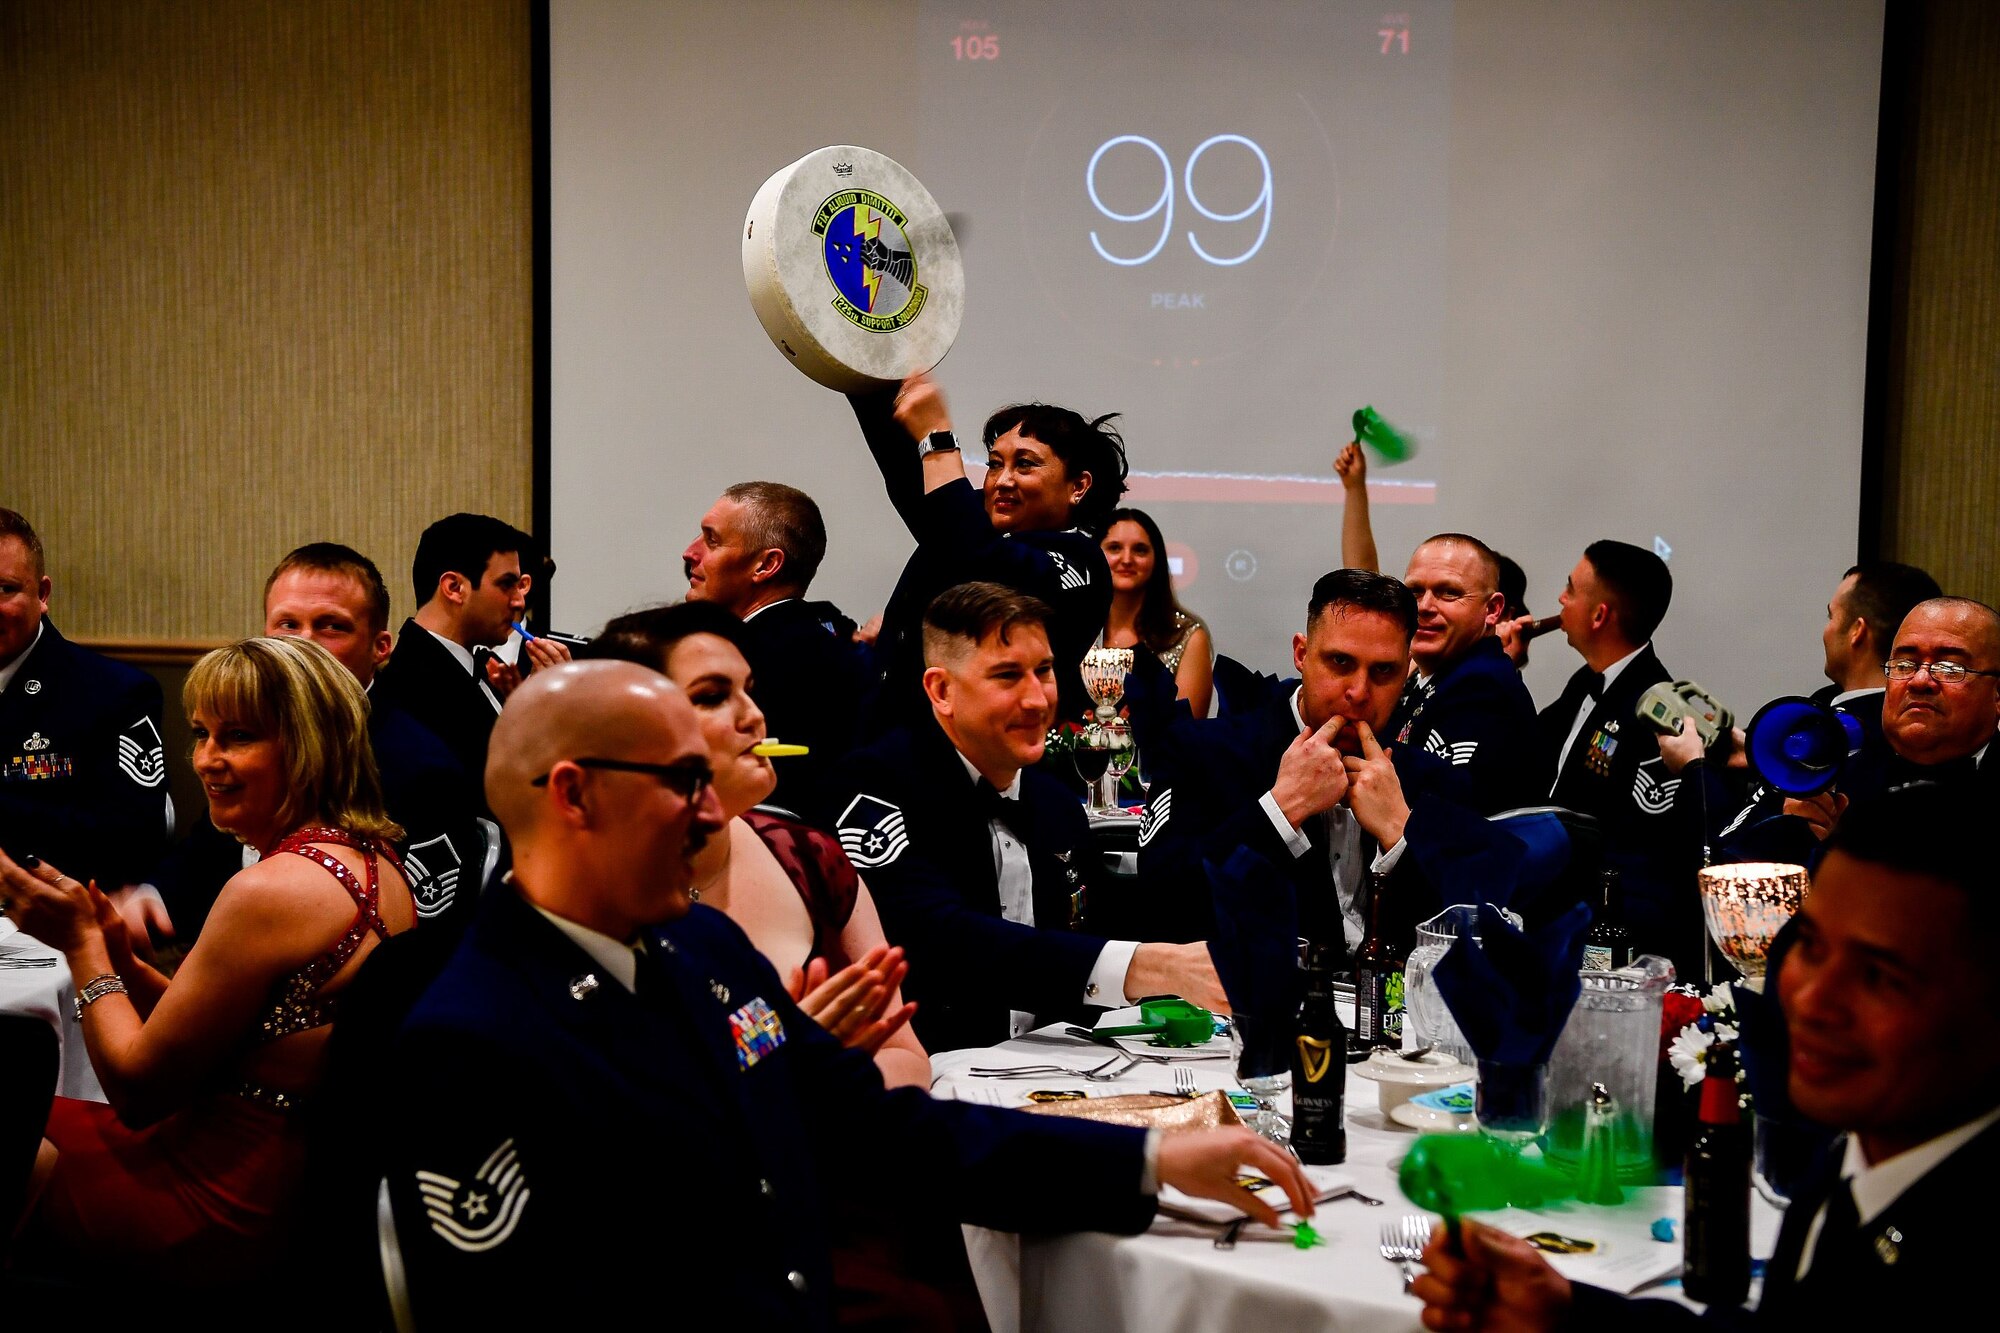 Members of the Western Air Defense Sector cheer for thier award nominees during the Washington Air National Guard's 9th Annual Awards Banquet held Jan. 27, 2018, at the American Lake Conference Center on Joint Base Lewis-McChord, Washington.  (U.S. Air National Guard Photo by Tech. Sgt. Timothy Chacon)